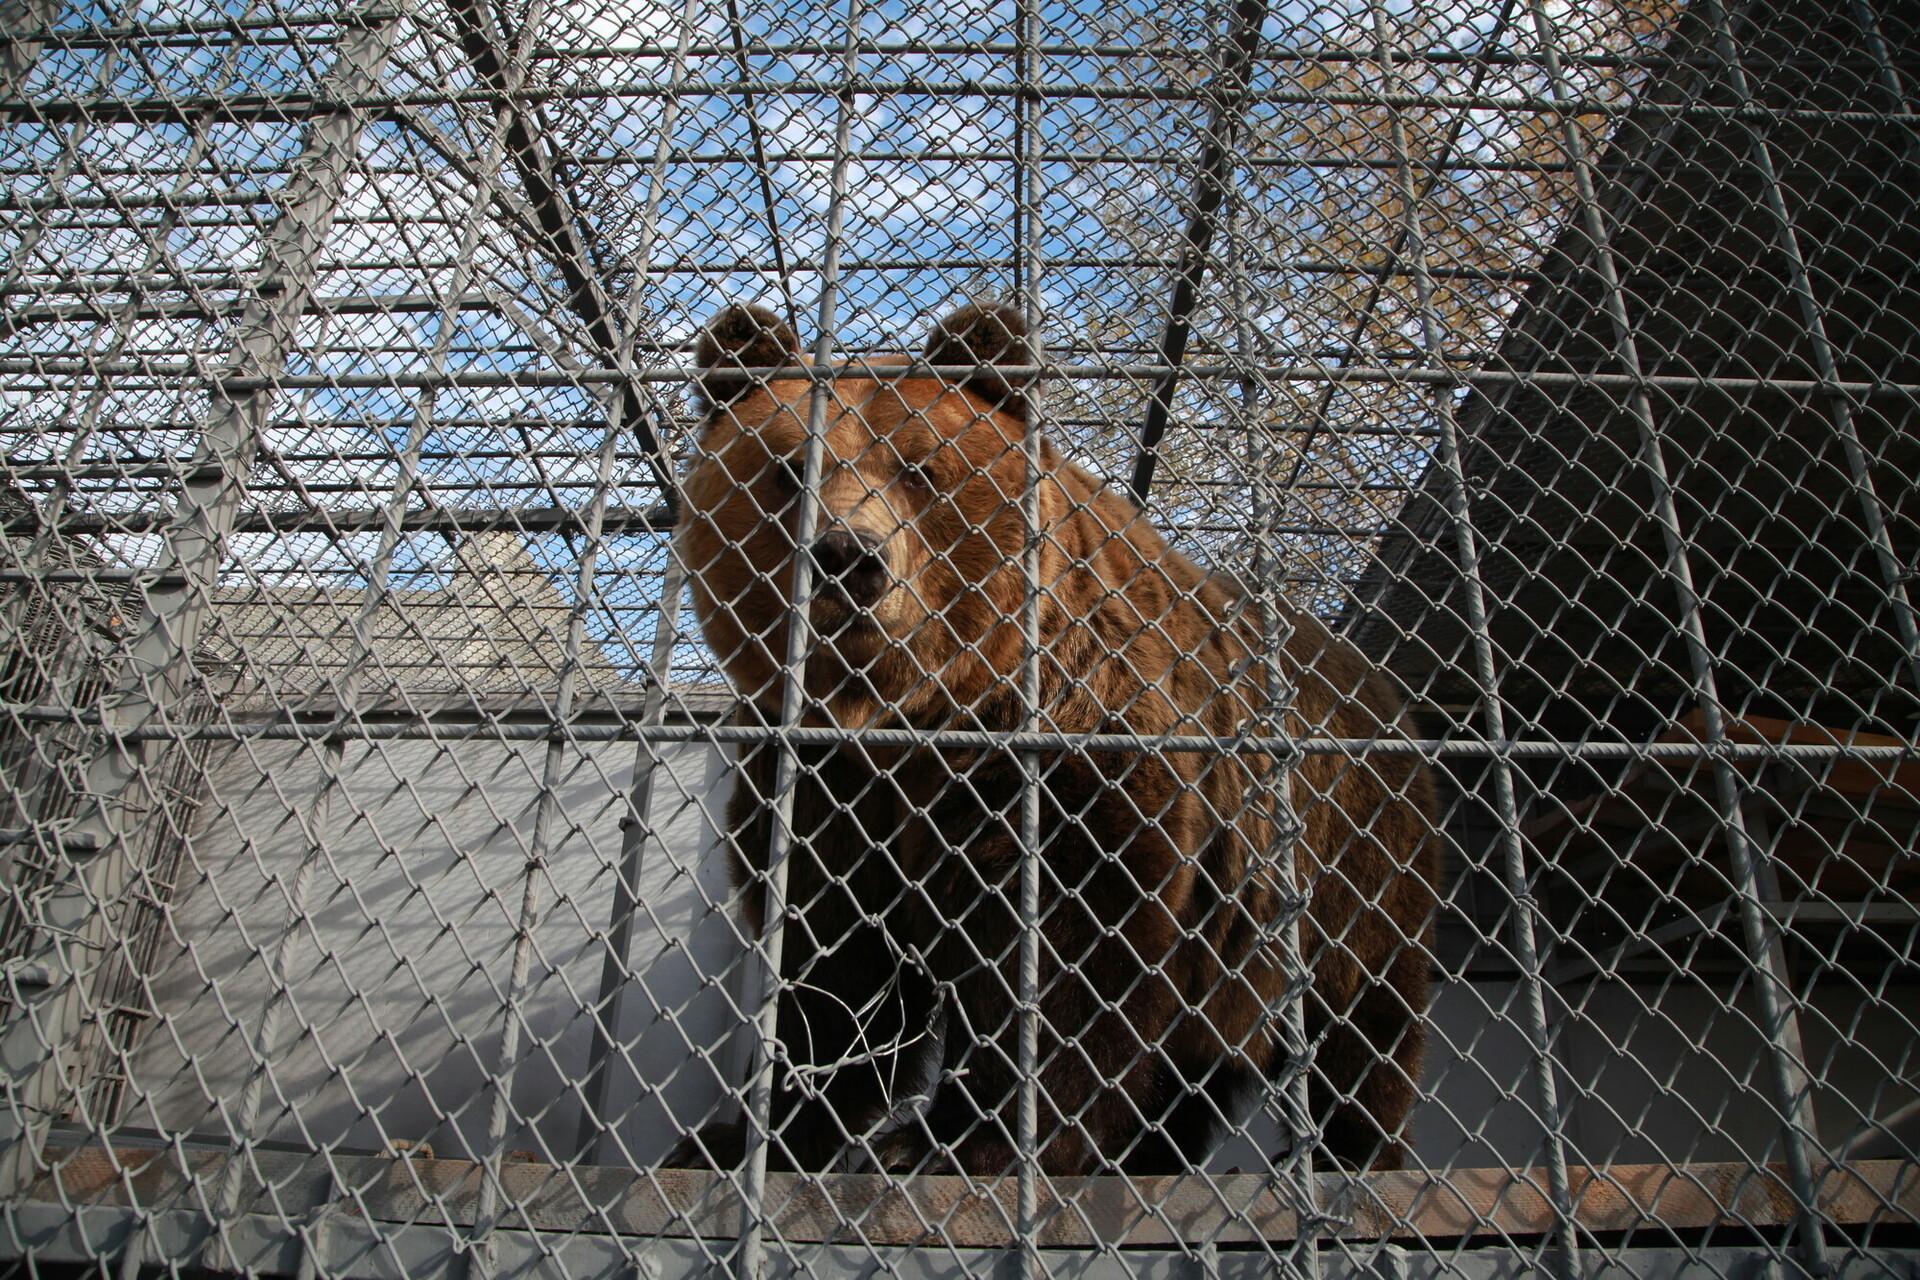 . donor saves wild animals rescued from Europe's worst zoo - FOUR PAWS  in US - Global Animal Protection Organization